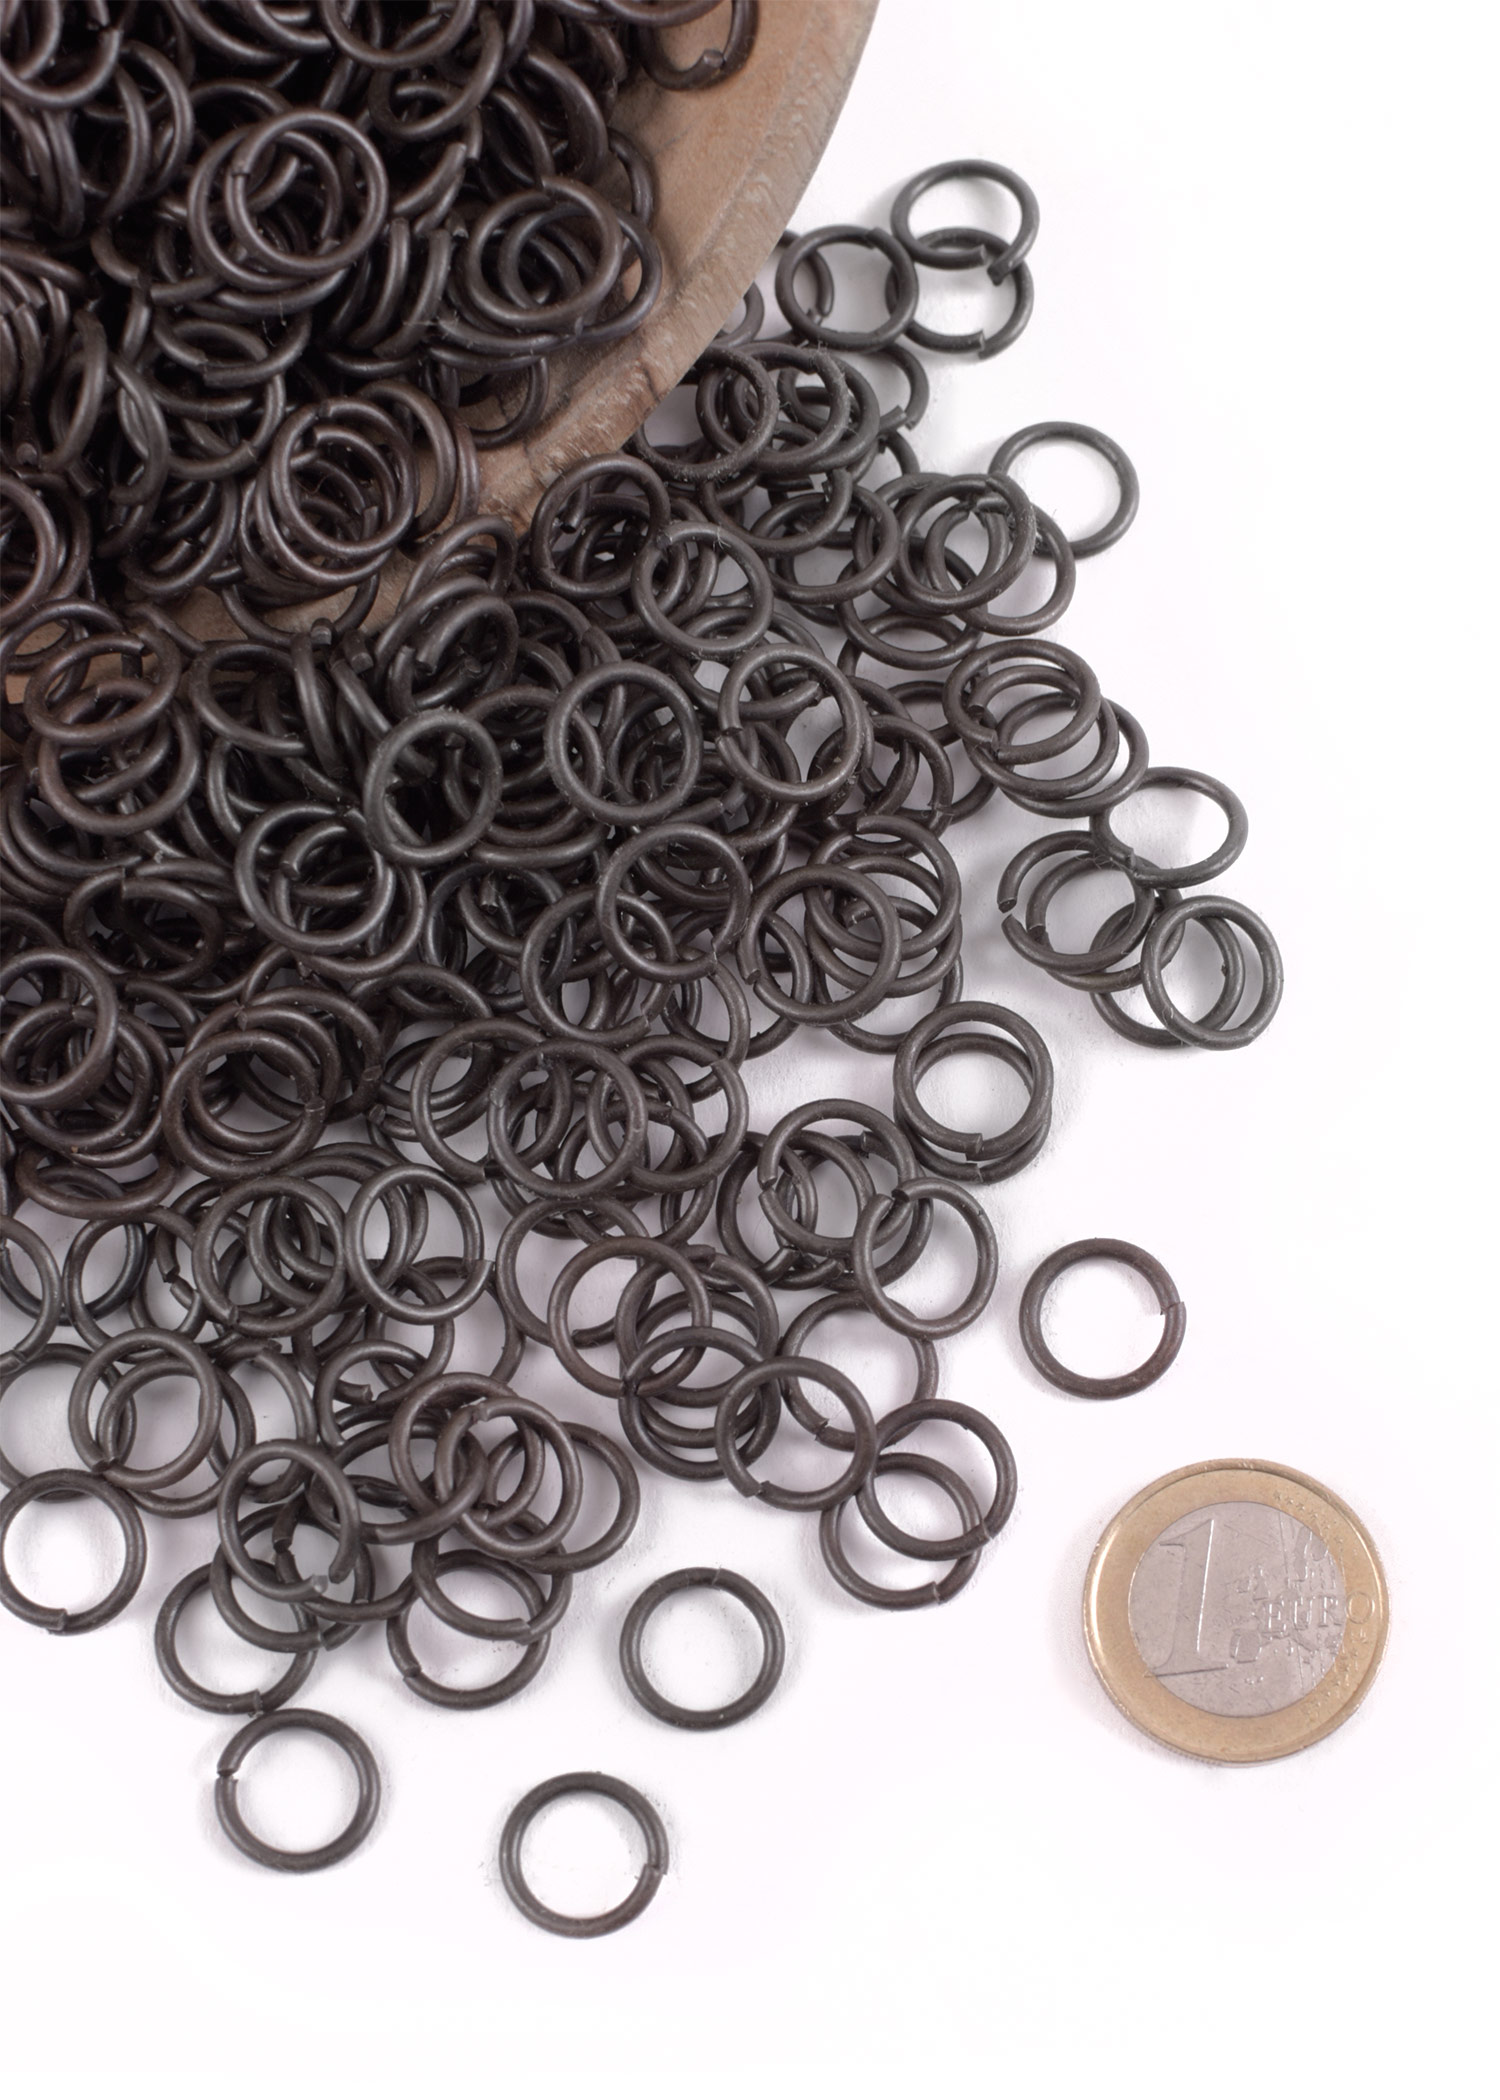 1 kg package lose chain mail rings, ID8mm, blackened